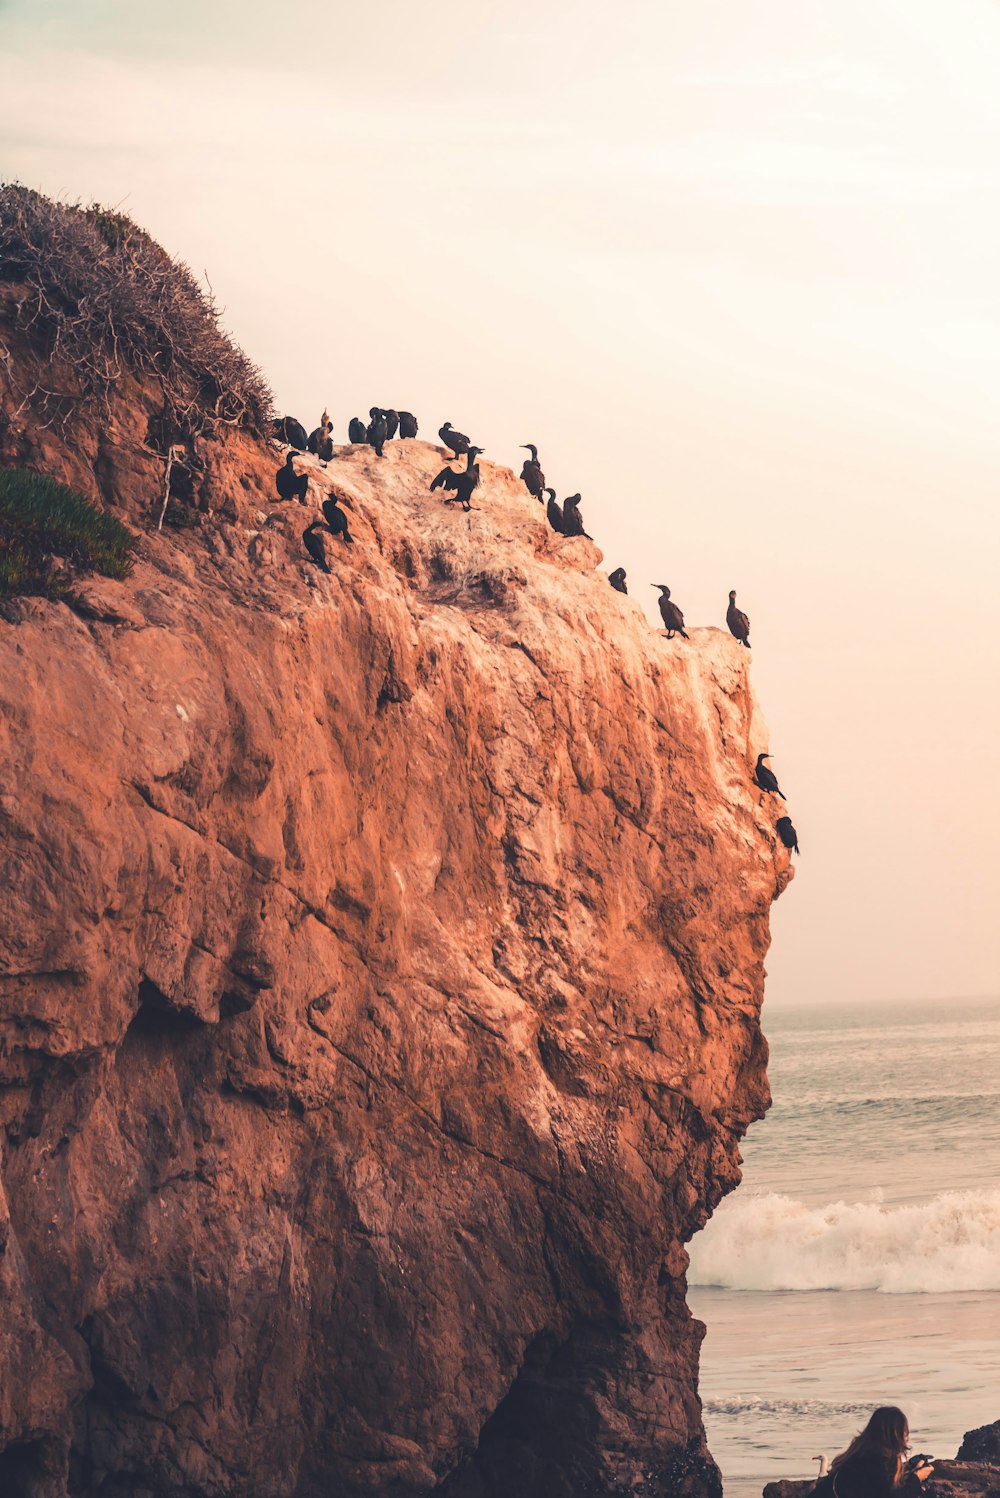 people standing on brown rock formation near sea during daytime